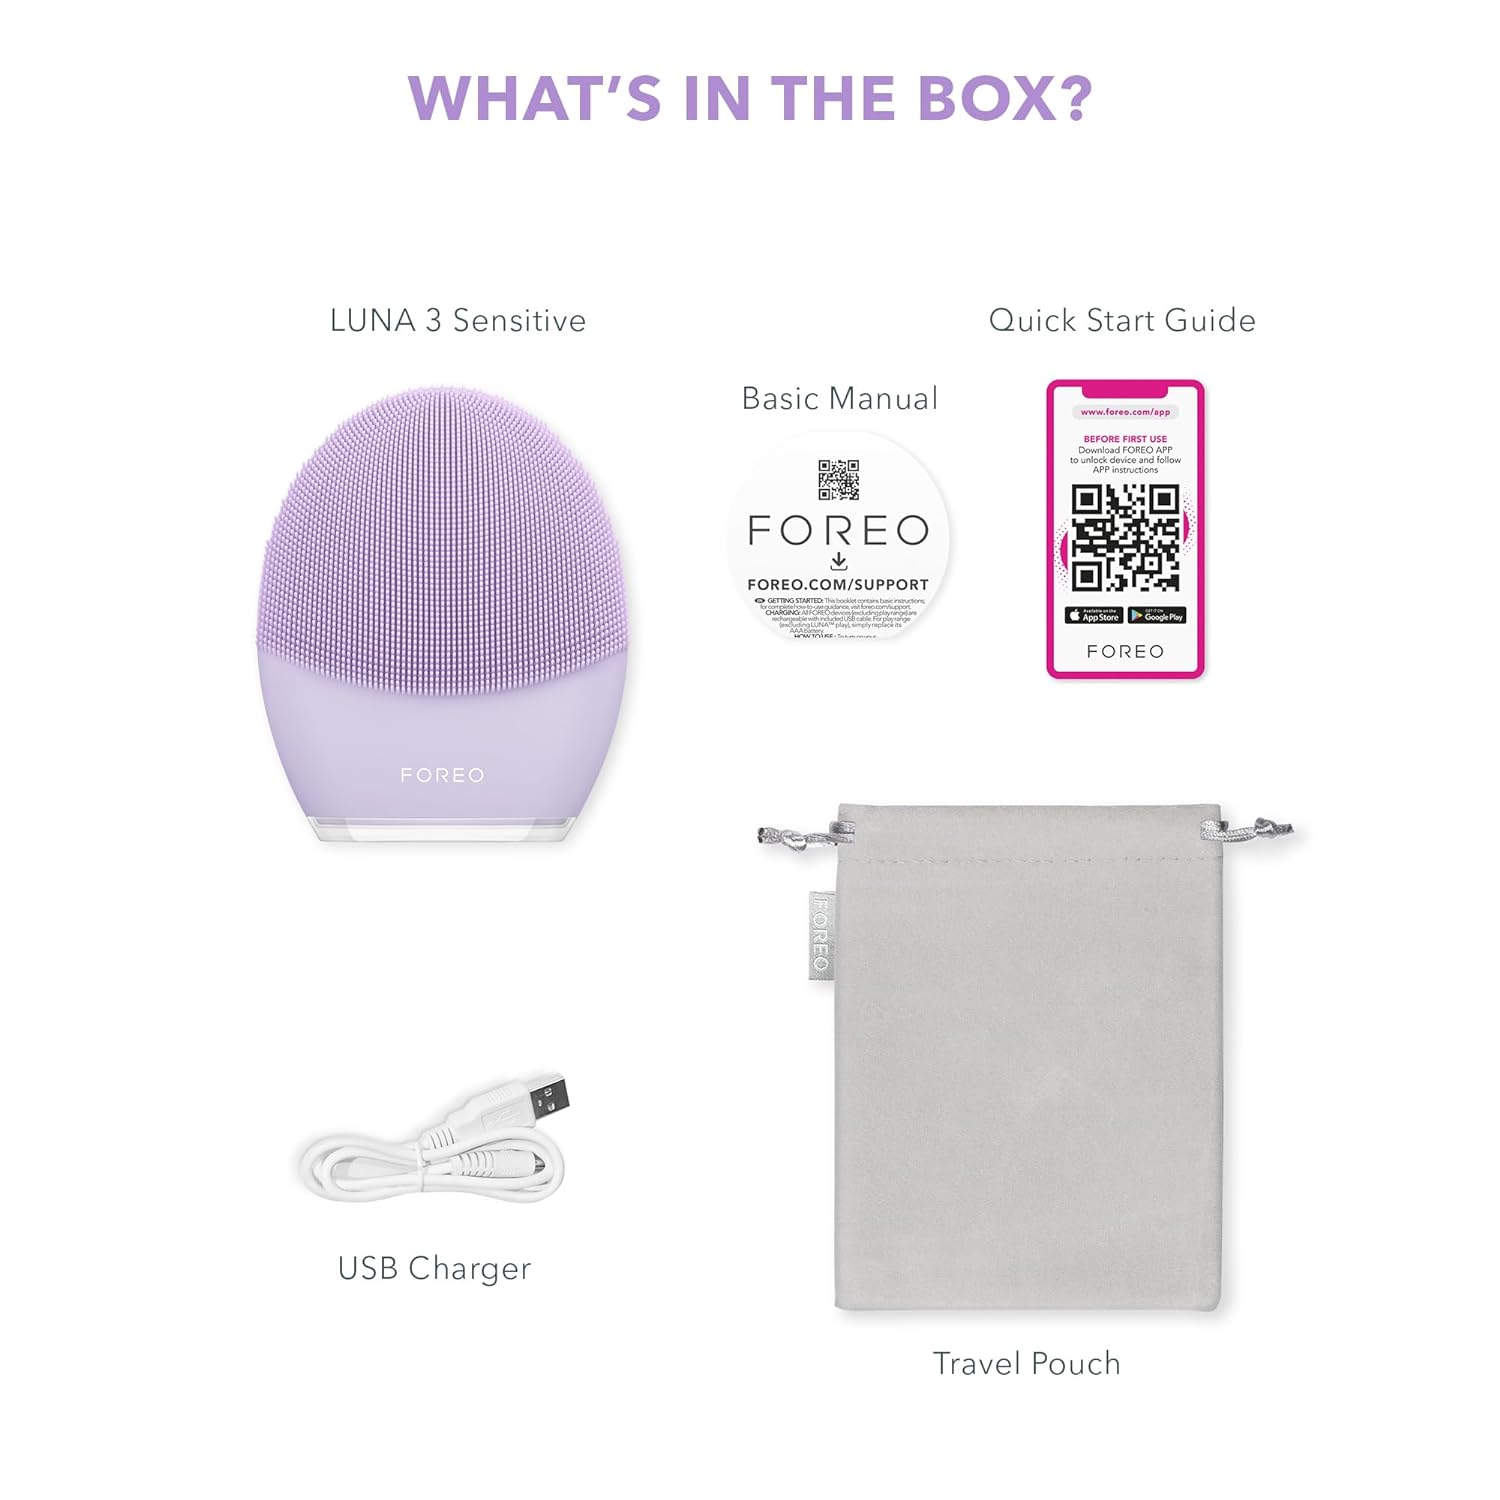 FOREO Sweden LUNA 3 Advanced Facial Cleansing Brush & Anti-Aging Massager for Sensitive Skin